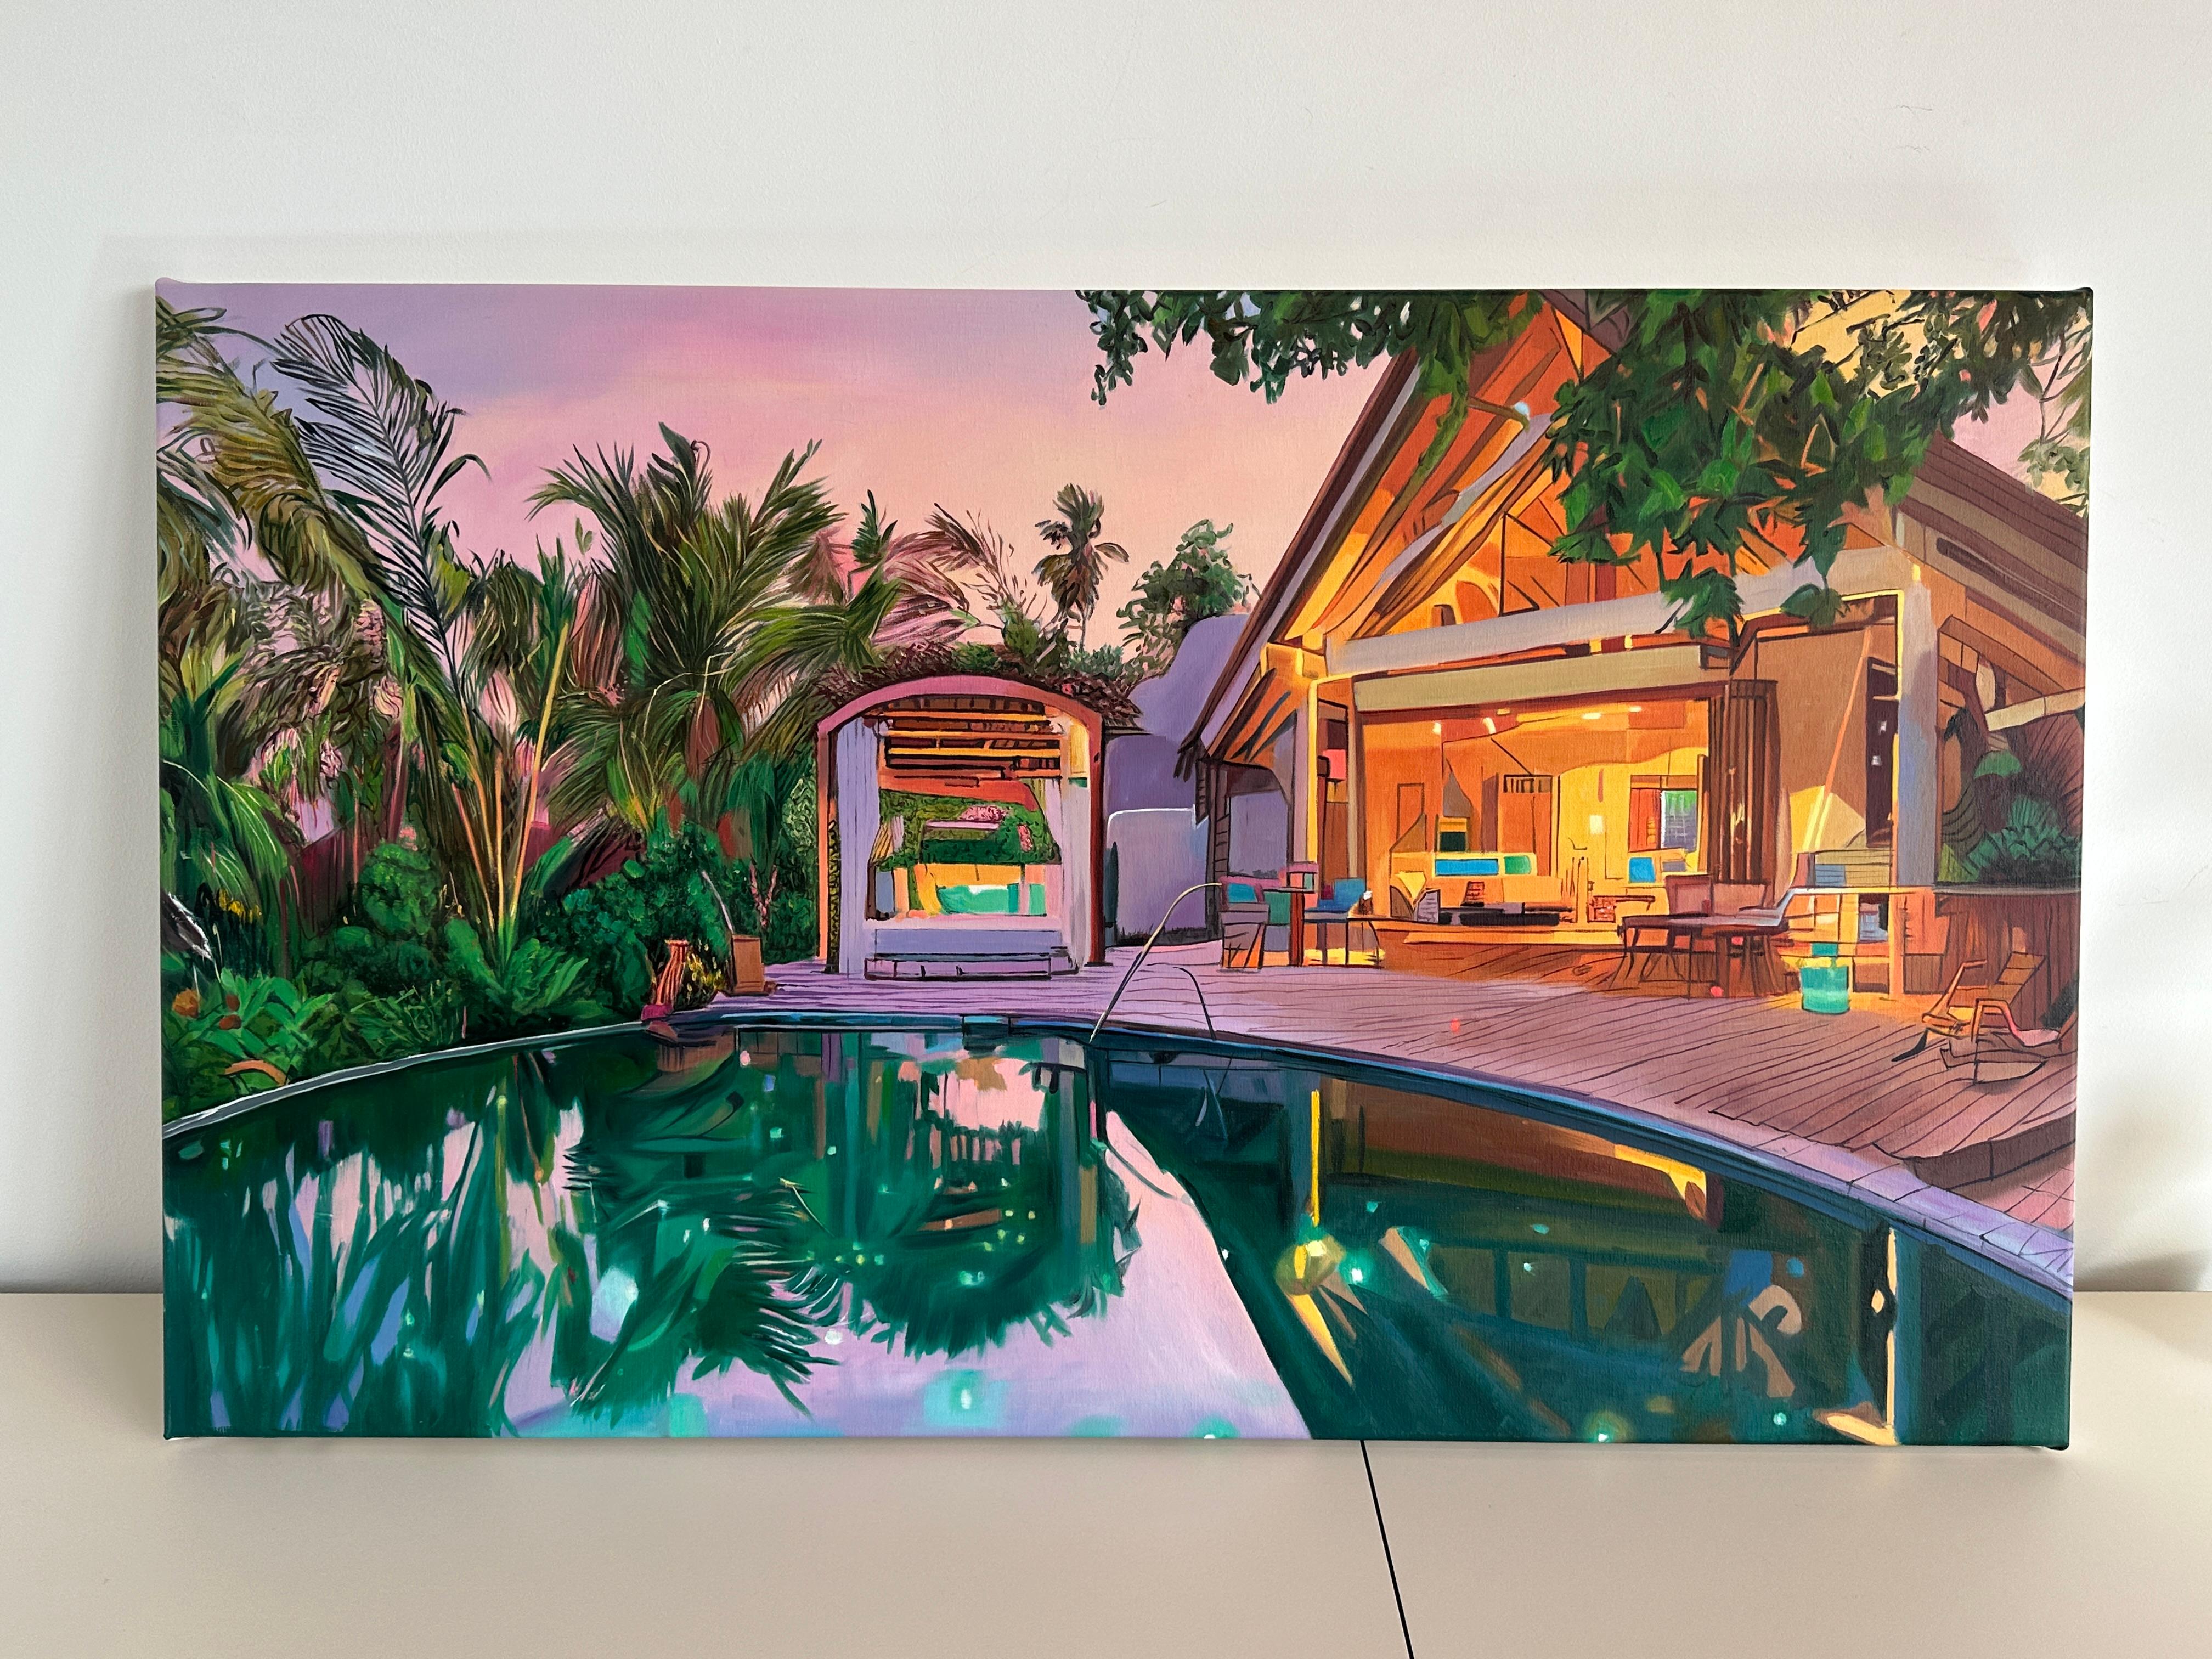 Wanderlust by Lilly Muth - Contemporary Architecture Villa Oil Painting For Sale 11